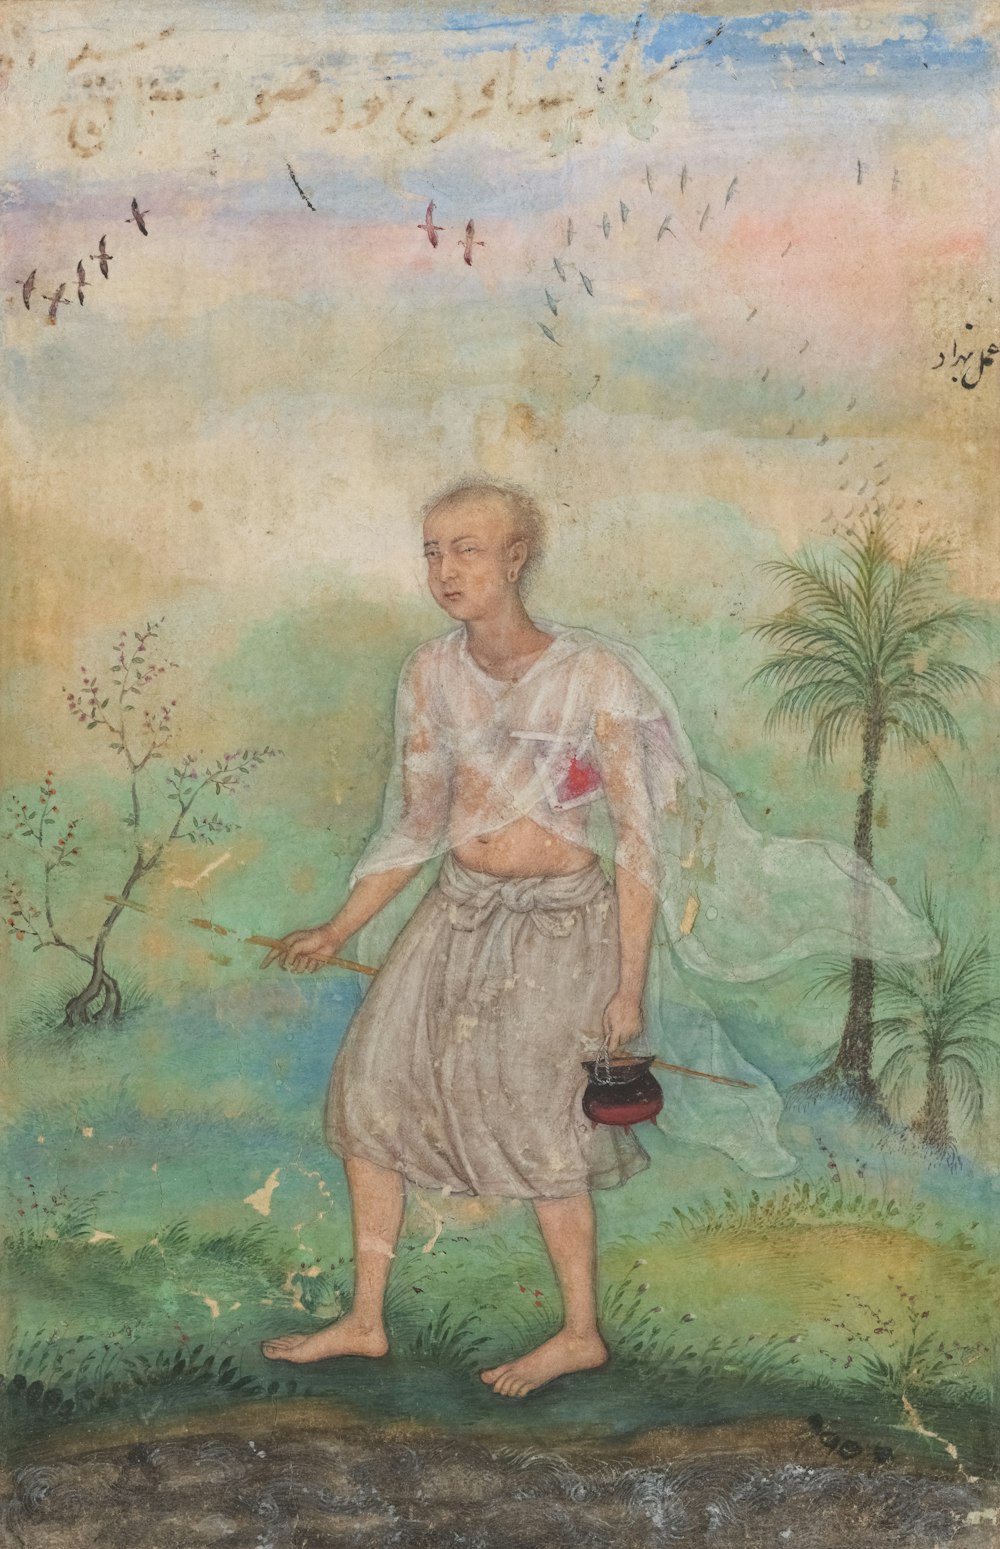 a painting of a man standing in a field